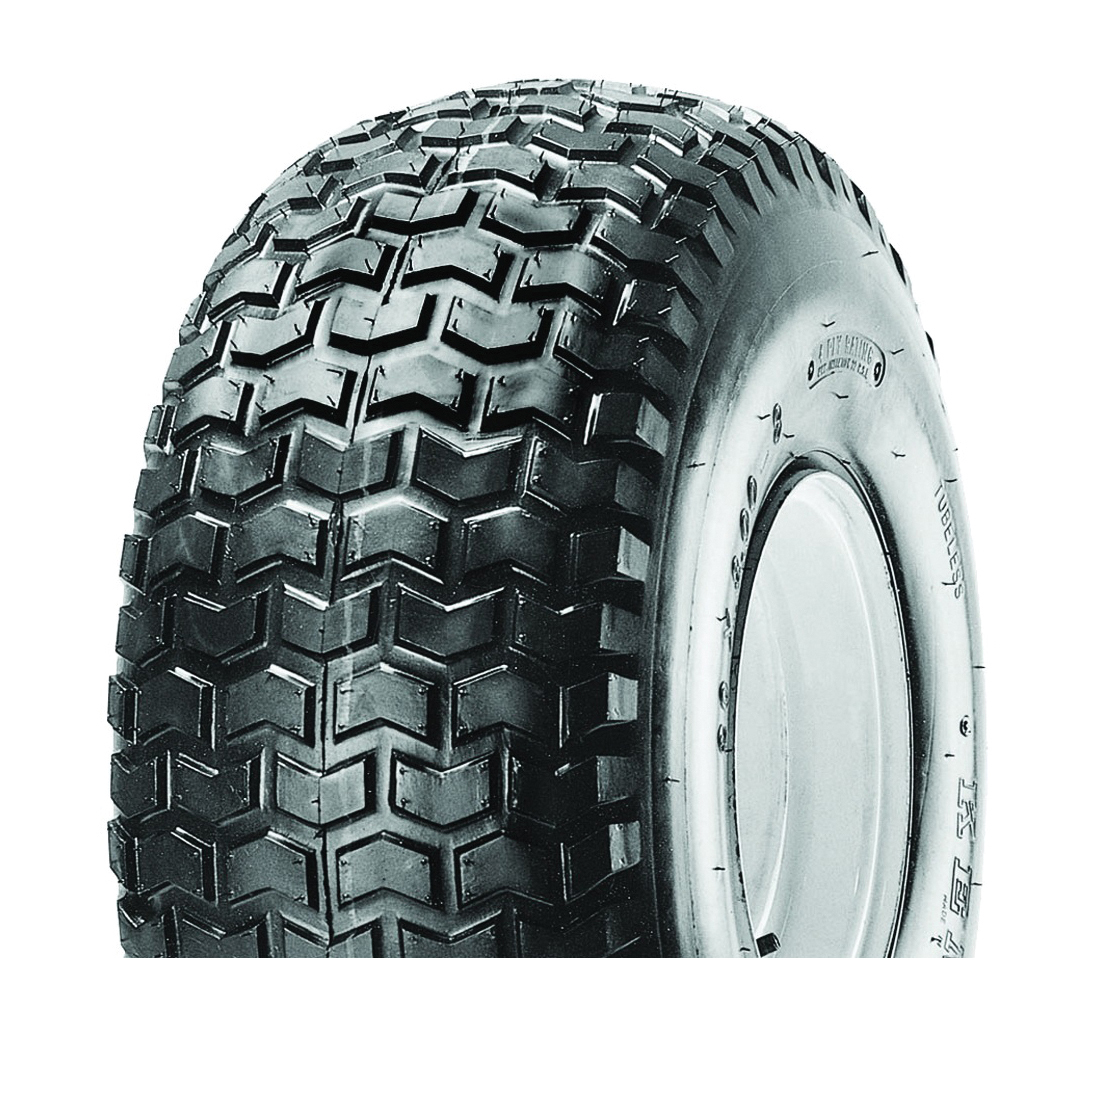 808-4TR-I/2TR-I Turf Rider Tire, Tubeless, For: 8 x 7 in Rim Lawnmowers and Tractors